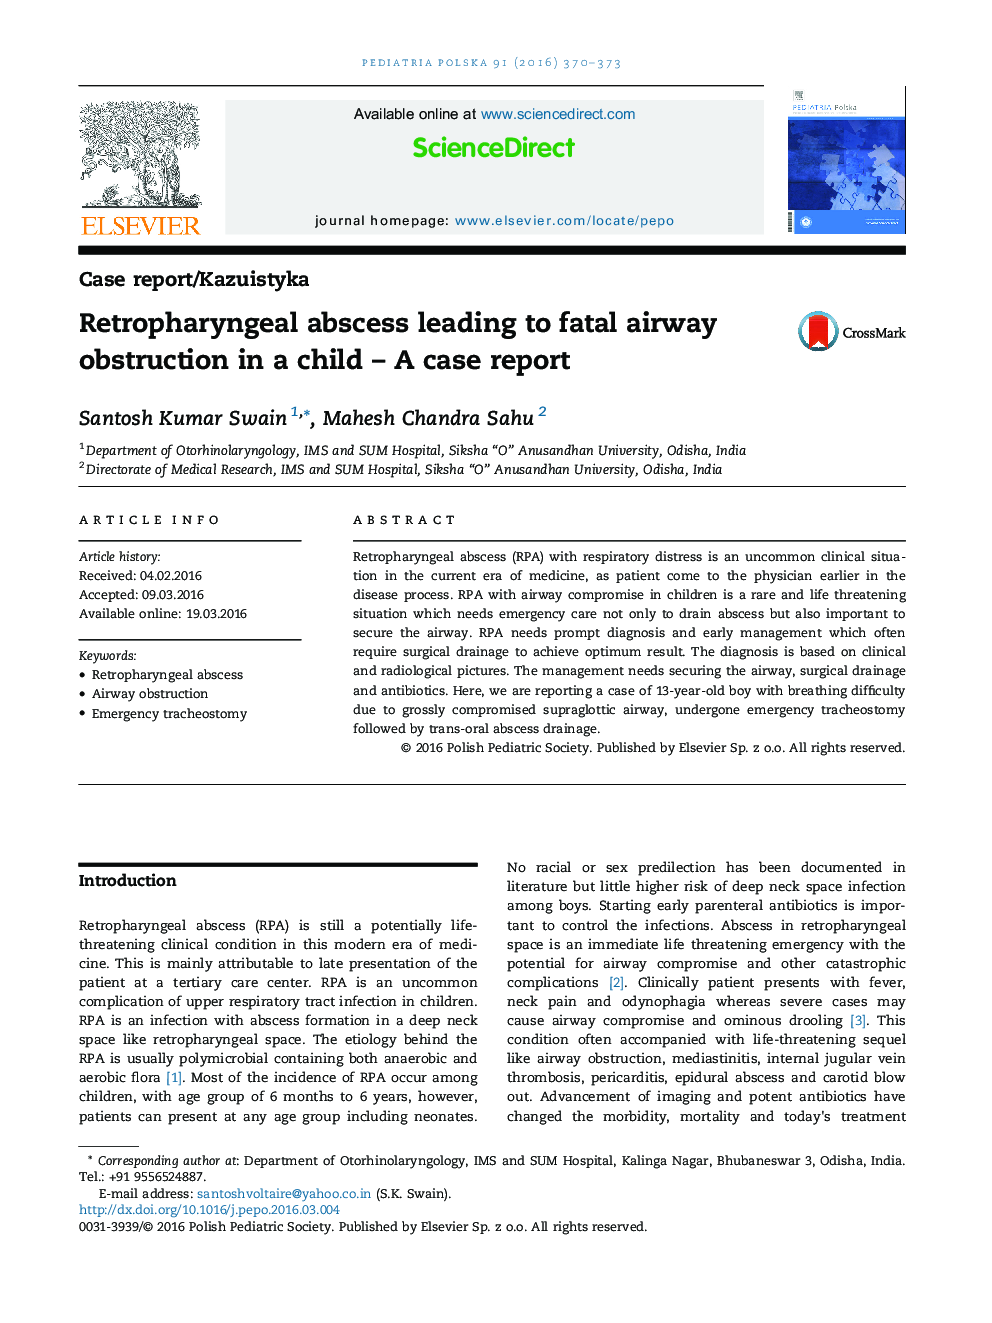 Retropharyngeal abscess leading to fatal airway obstruction in a child – A case report